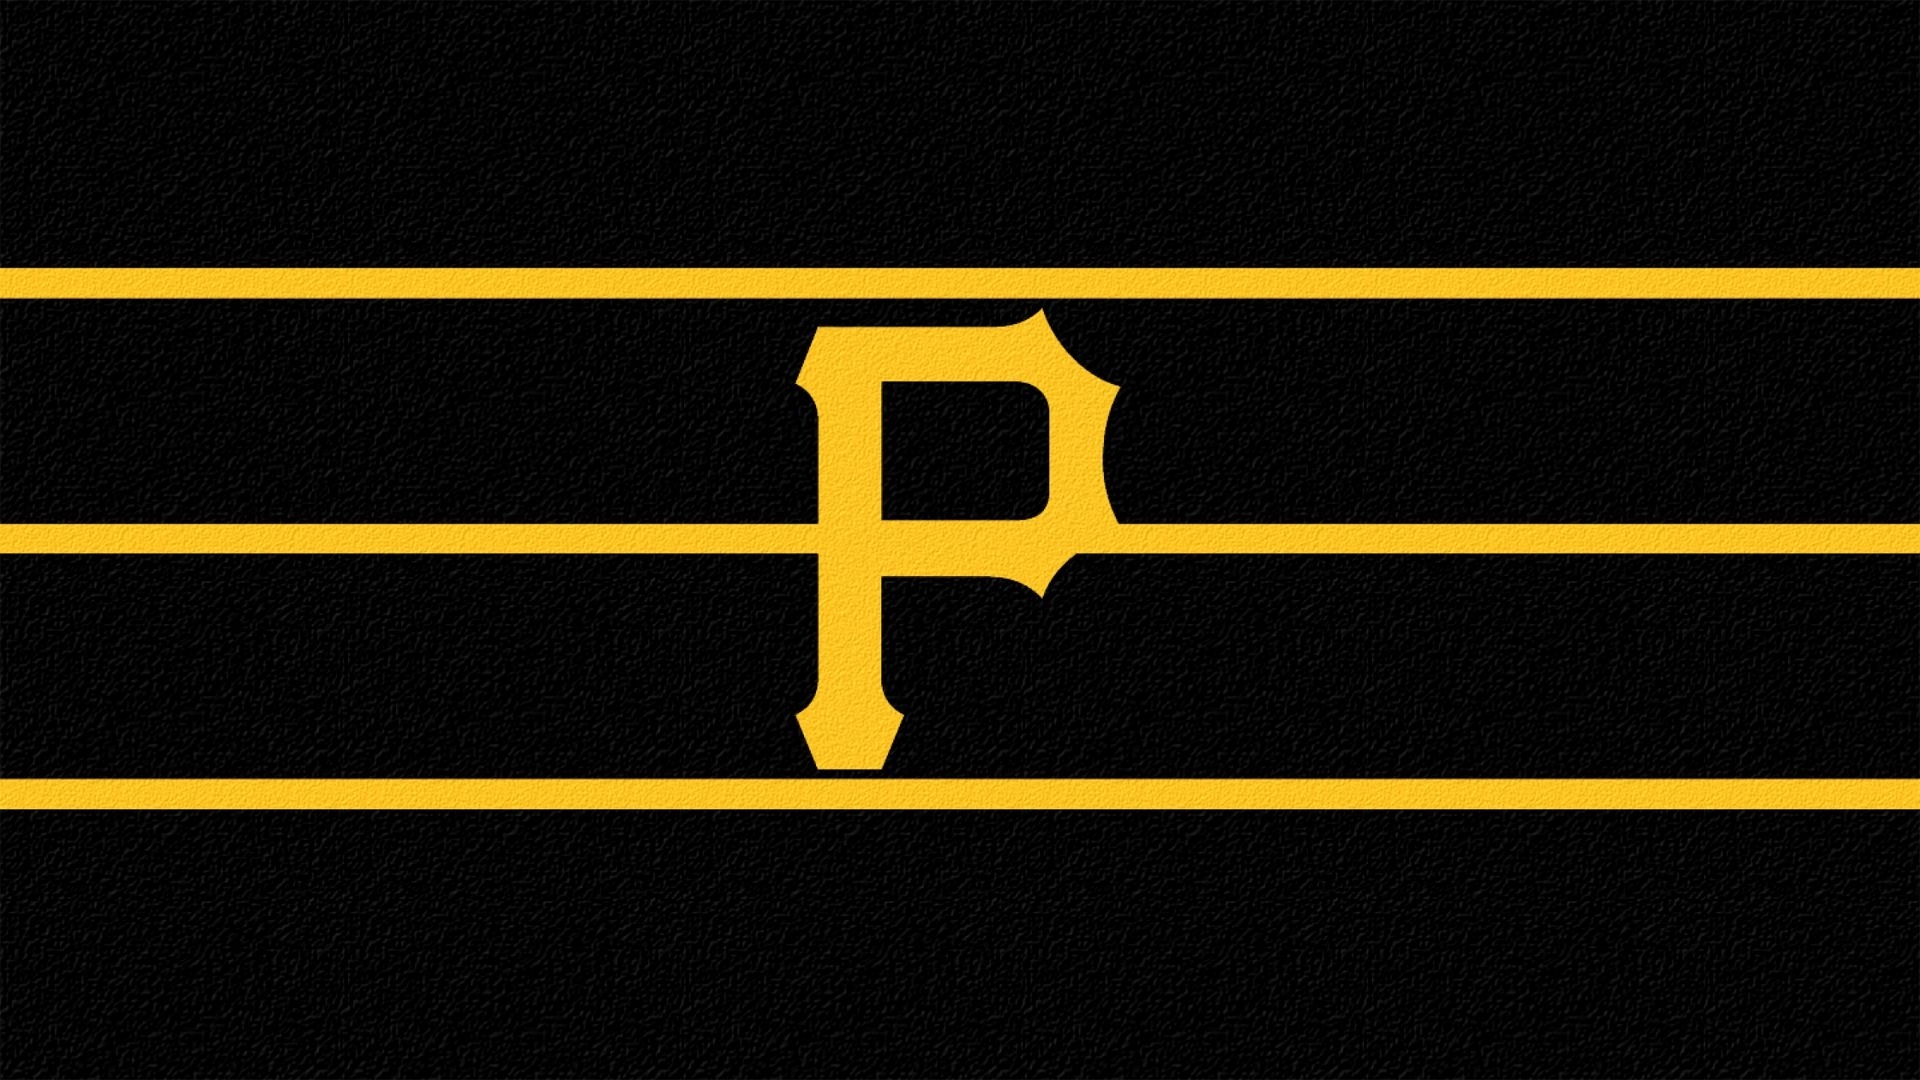 10 Best Pittsburgh Pirates Phone Wallpaper FULL HD 1920×1080 For PC Background